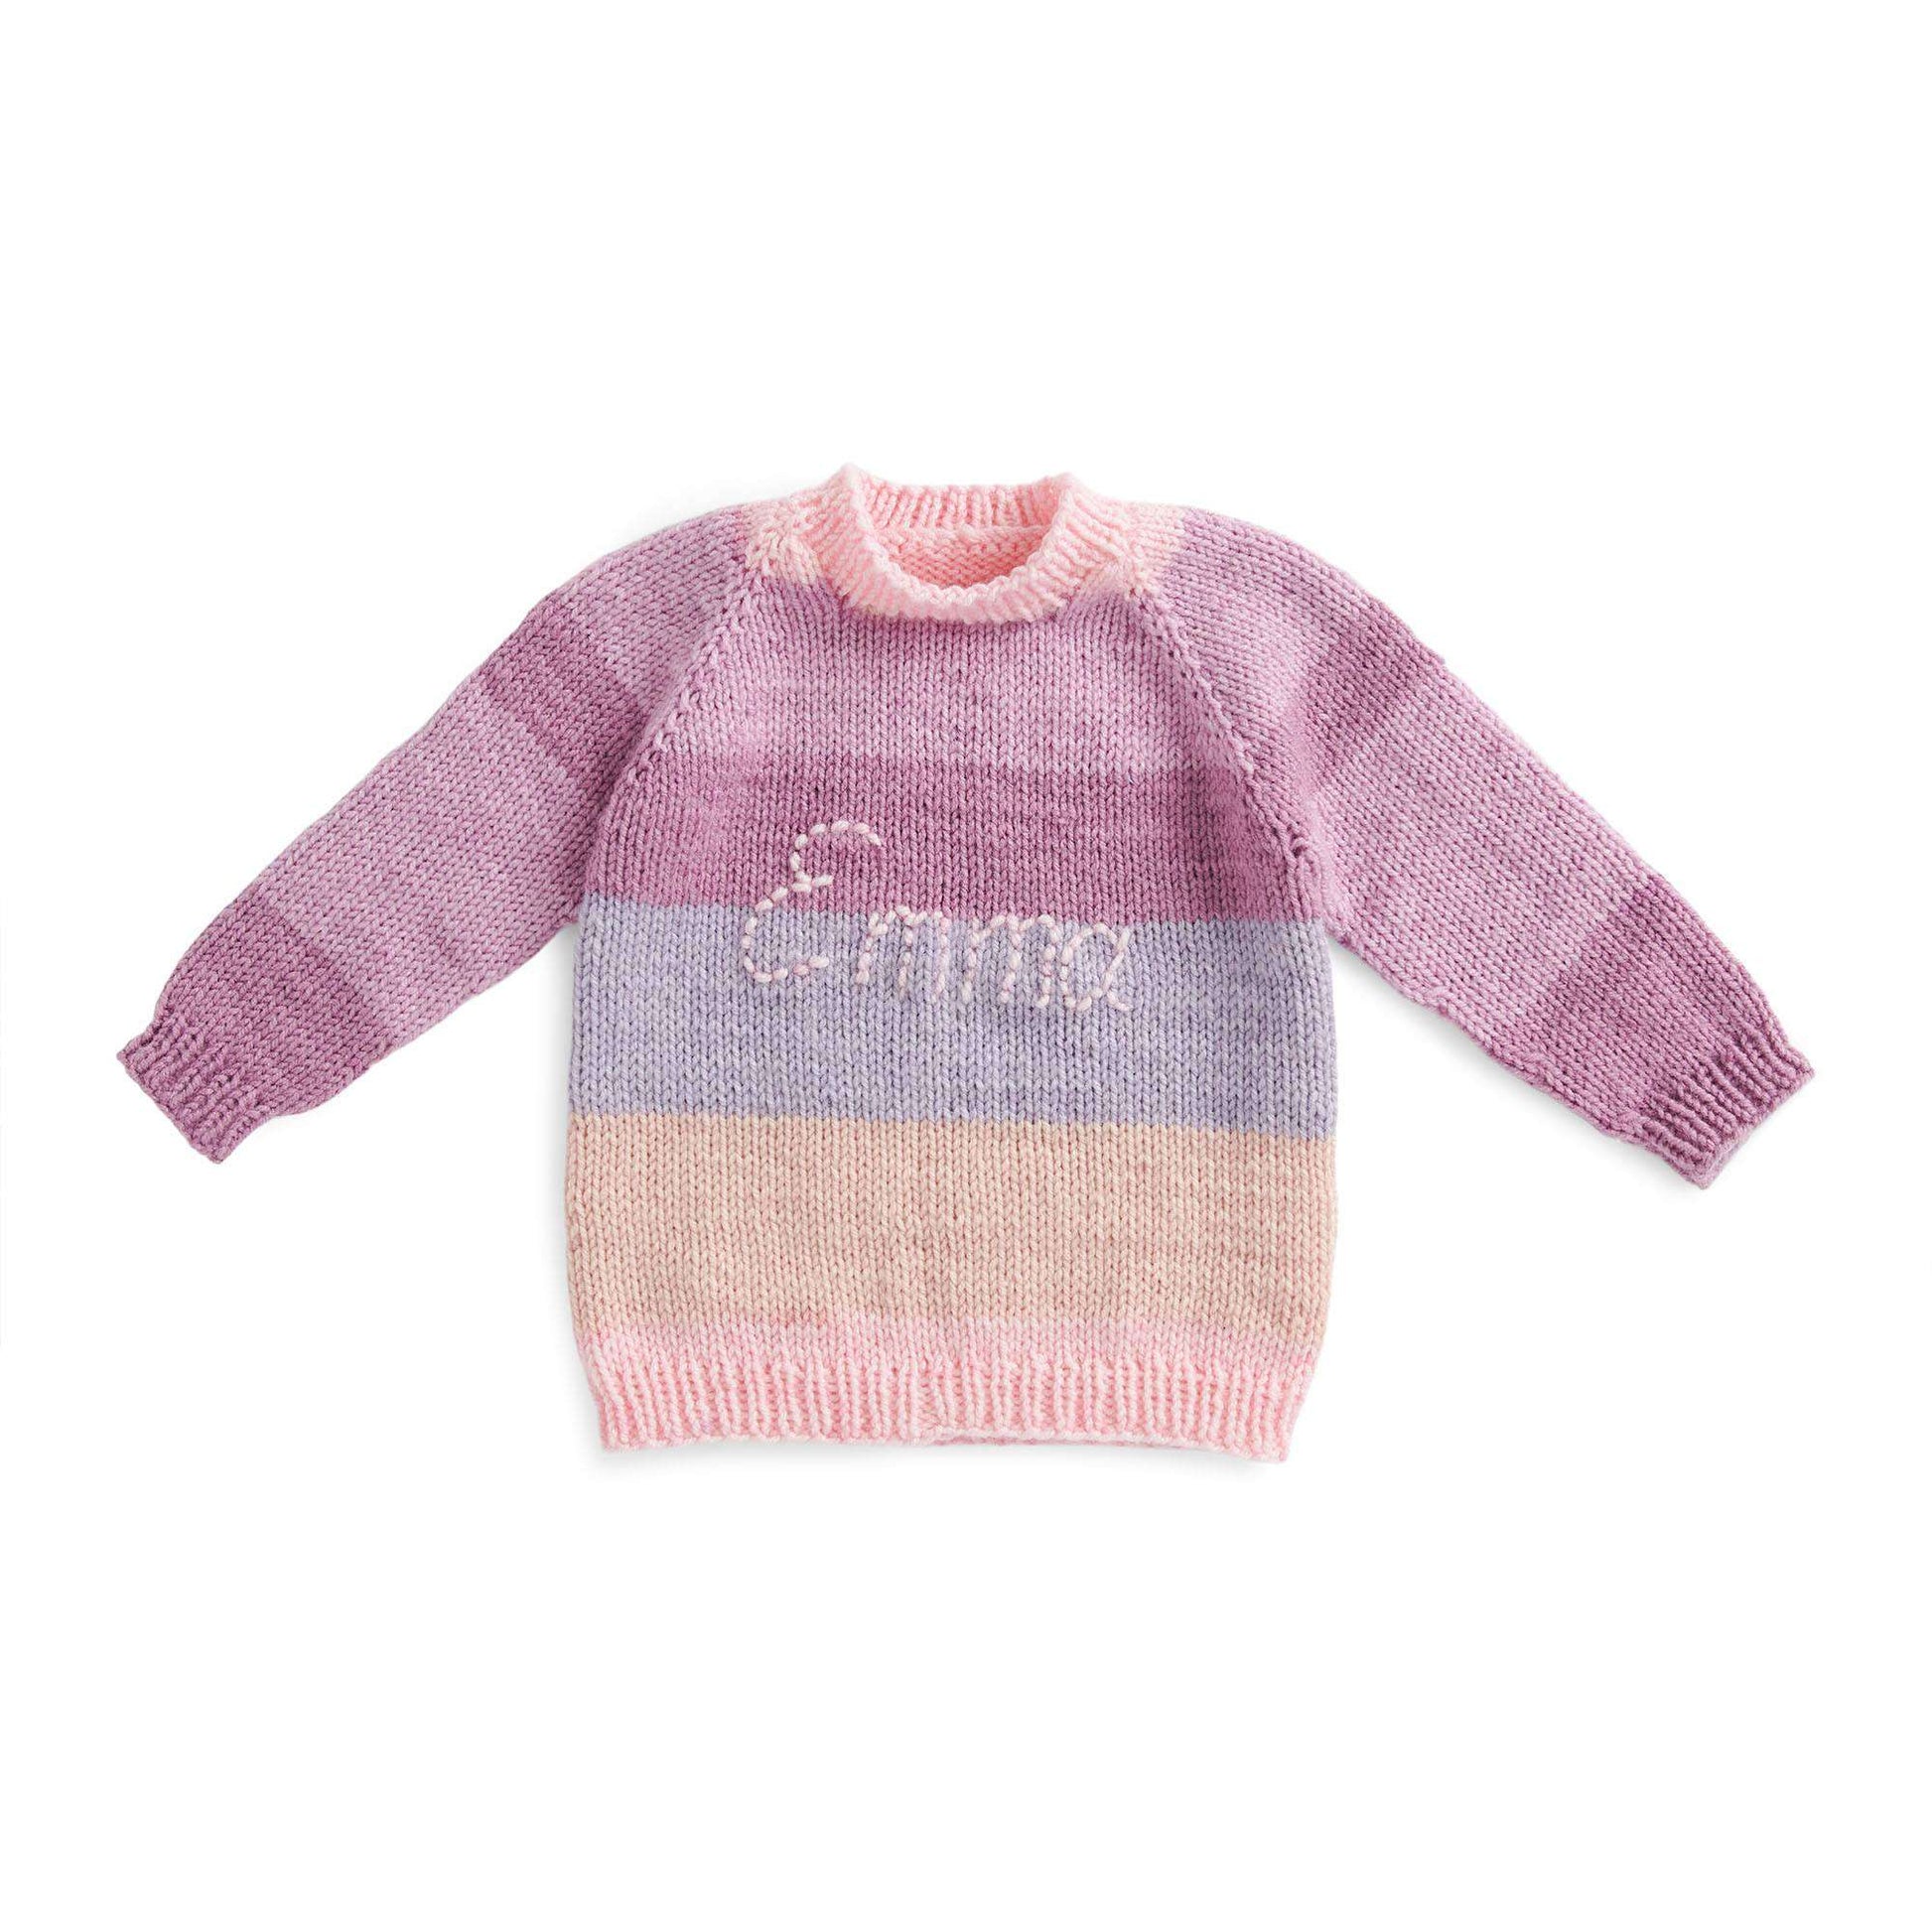 Free Caron Baby Cakes Top Down Knit Pullover With Embroidered Name Pattern